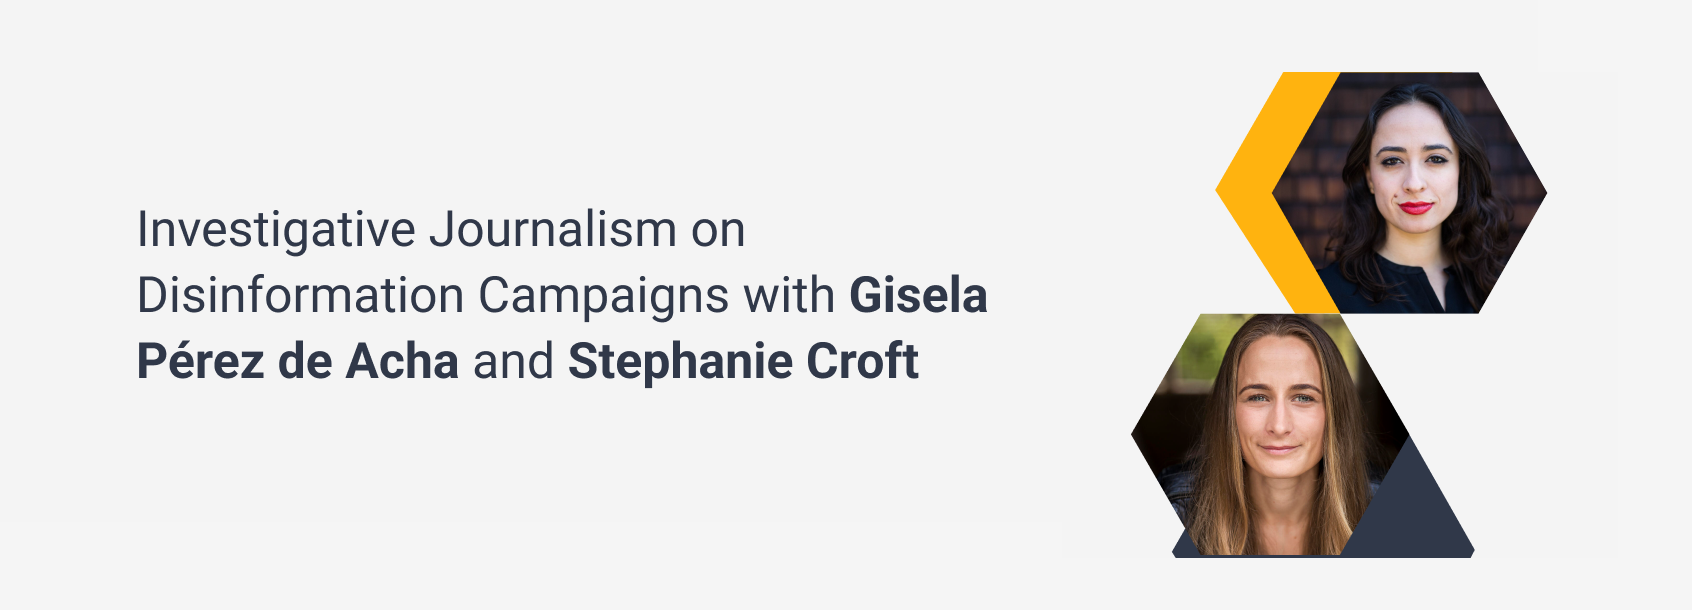 Investigative Journalism on  Disinformation Campaigns with Gisela Pérez de Acha and Stephanie Croft